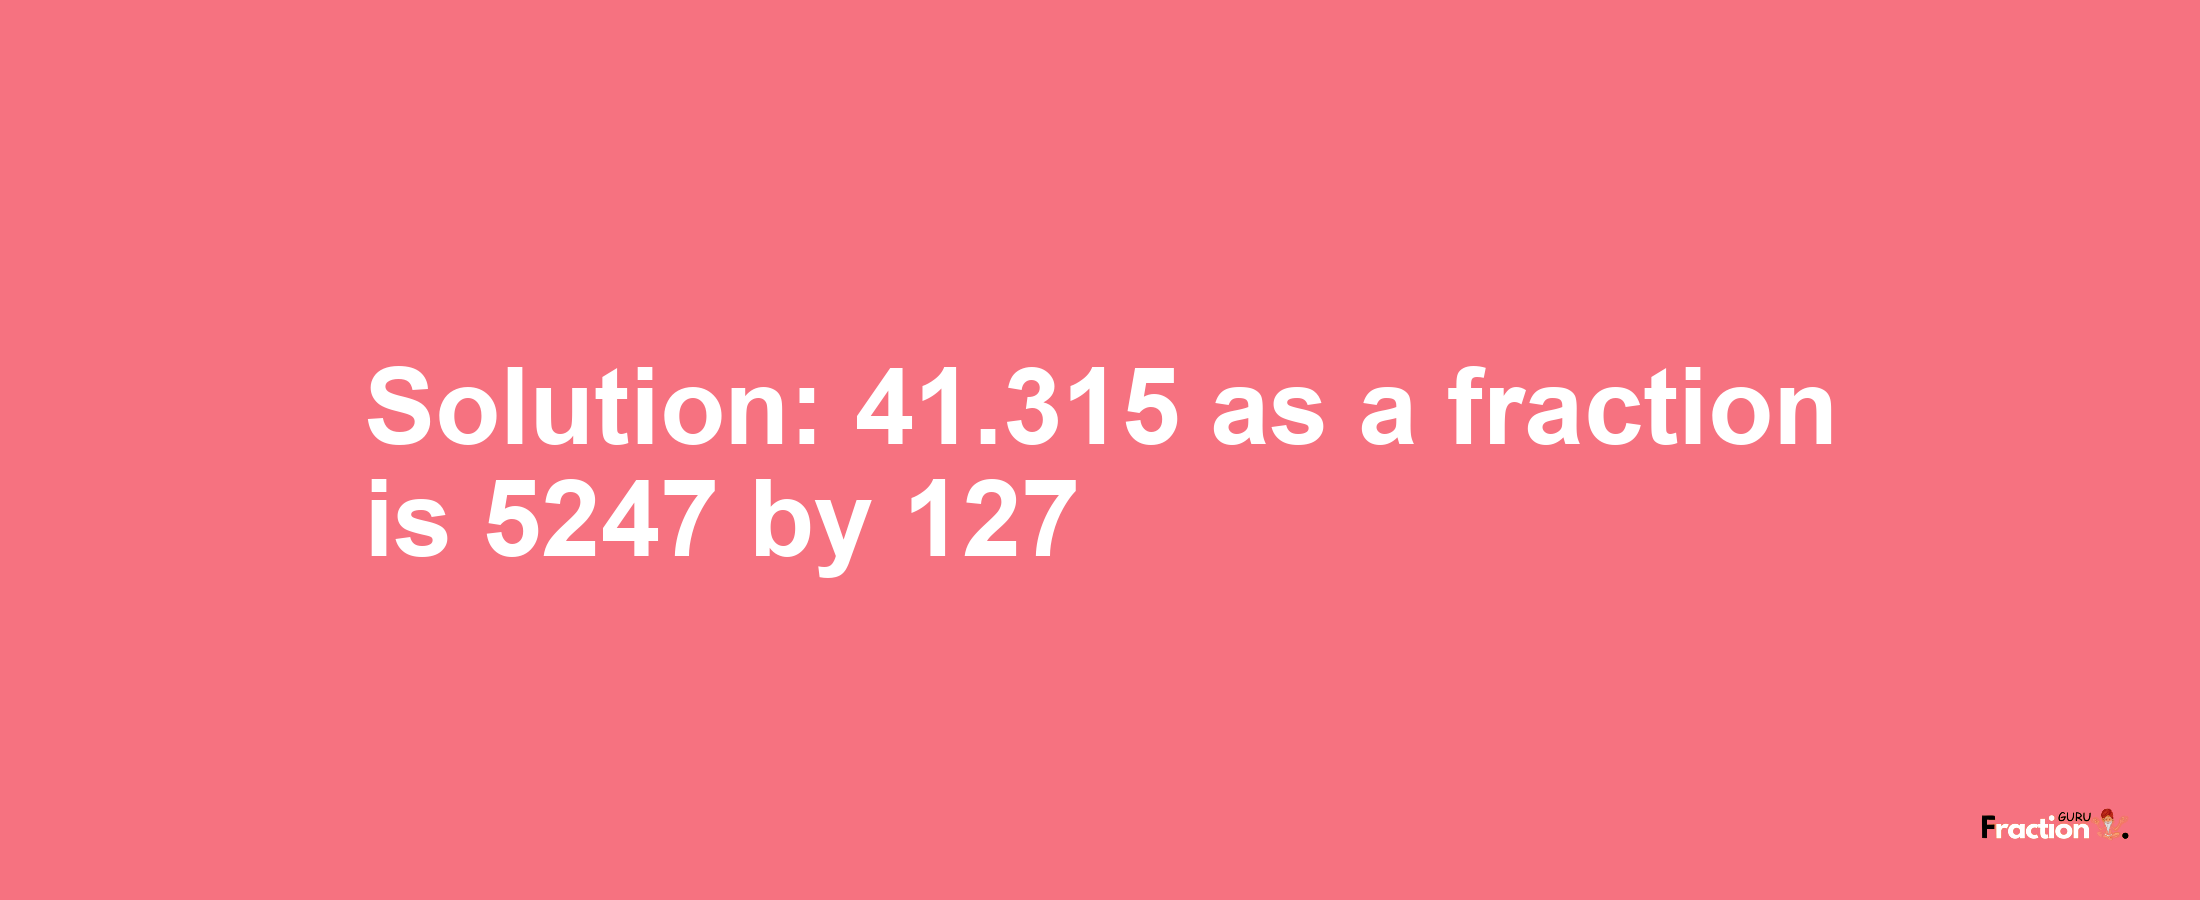 Solution:41.315 as a fraction is 5247/127